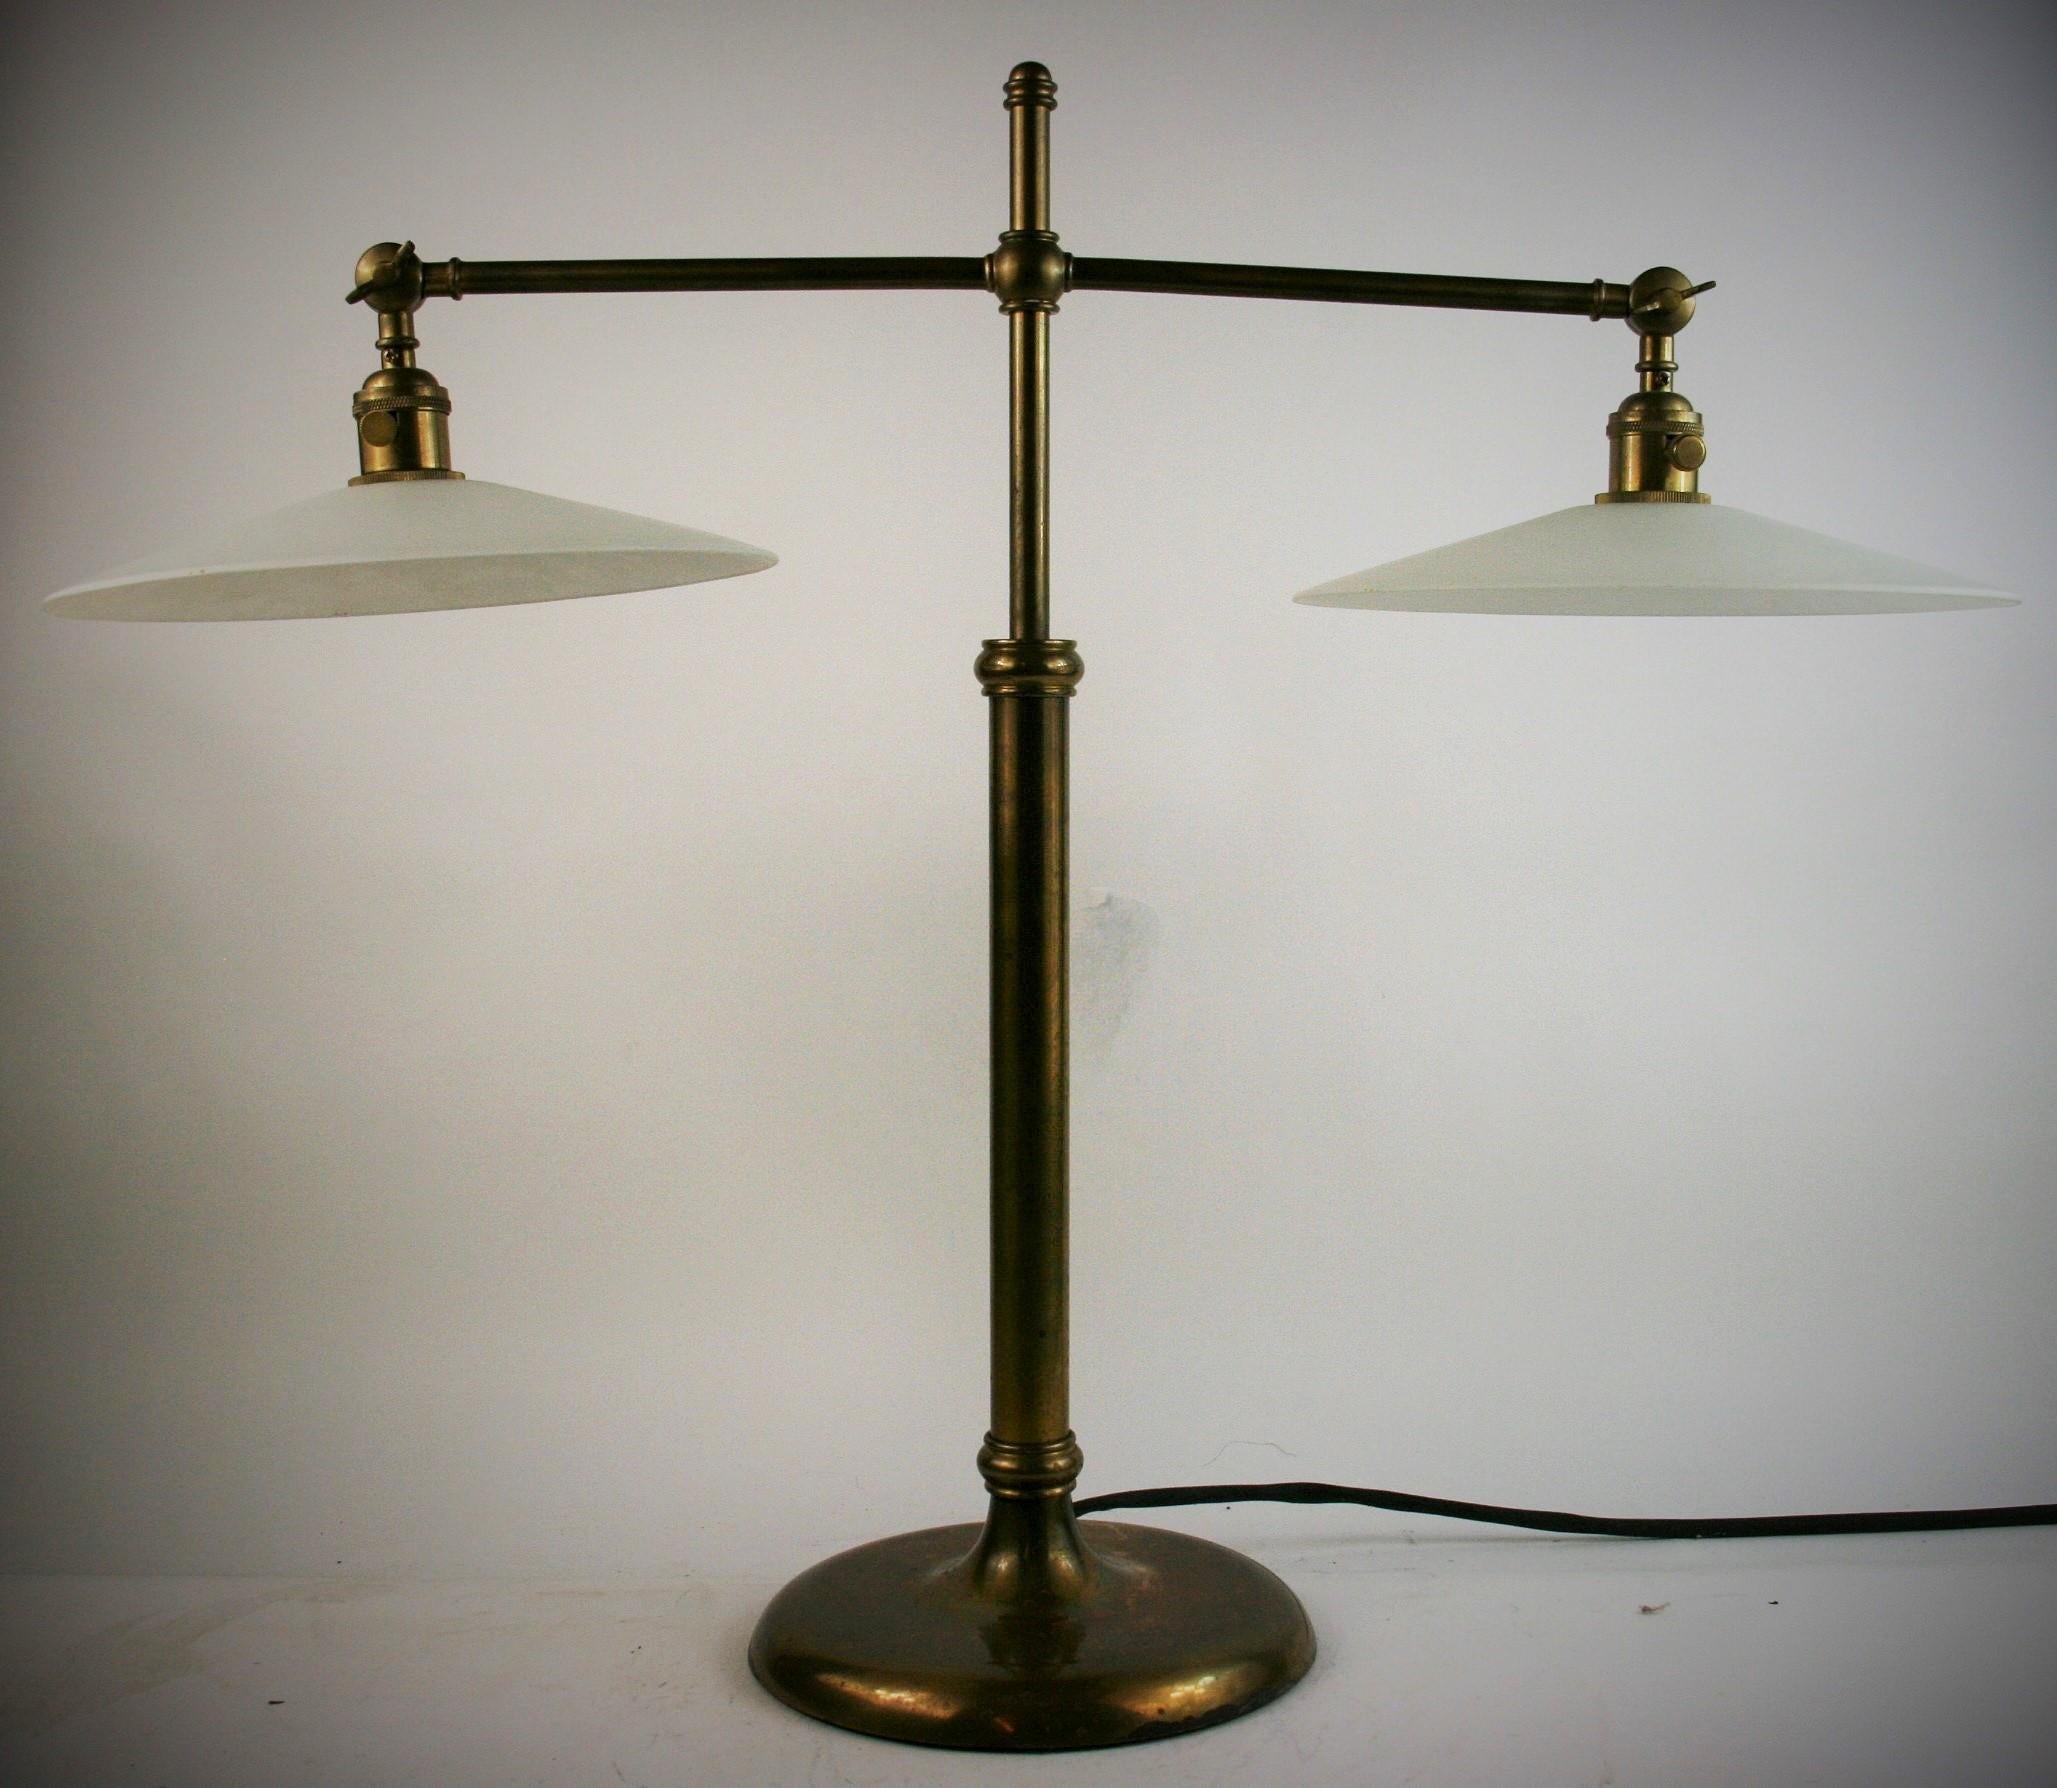 2-345 brass adjustable 2 light table/desk lamp with frosted glass shade'
Each light is adjustable. The center extends from 24